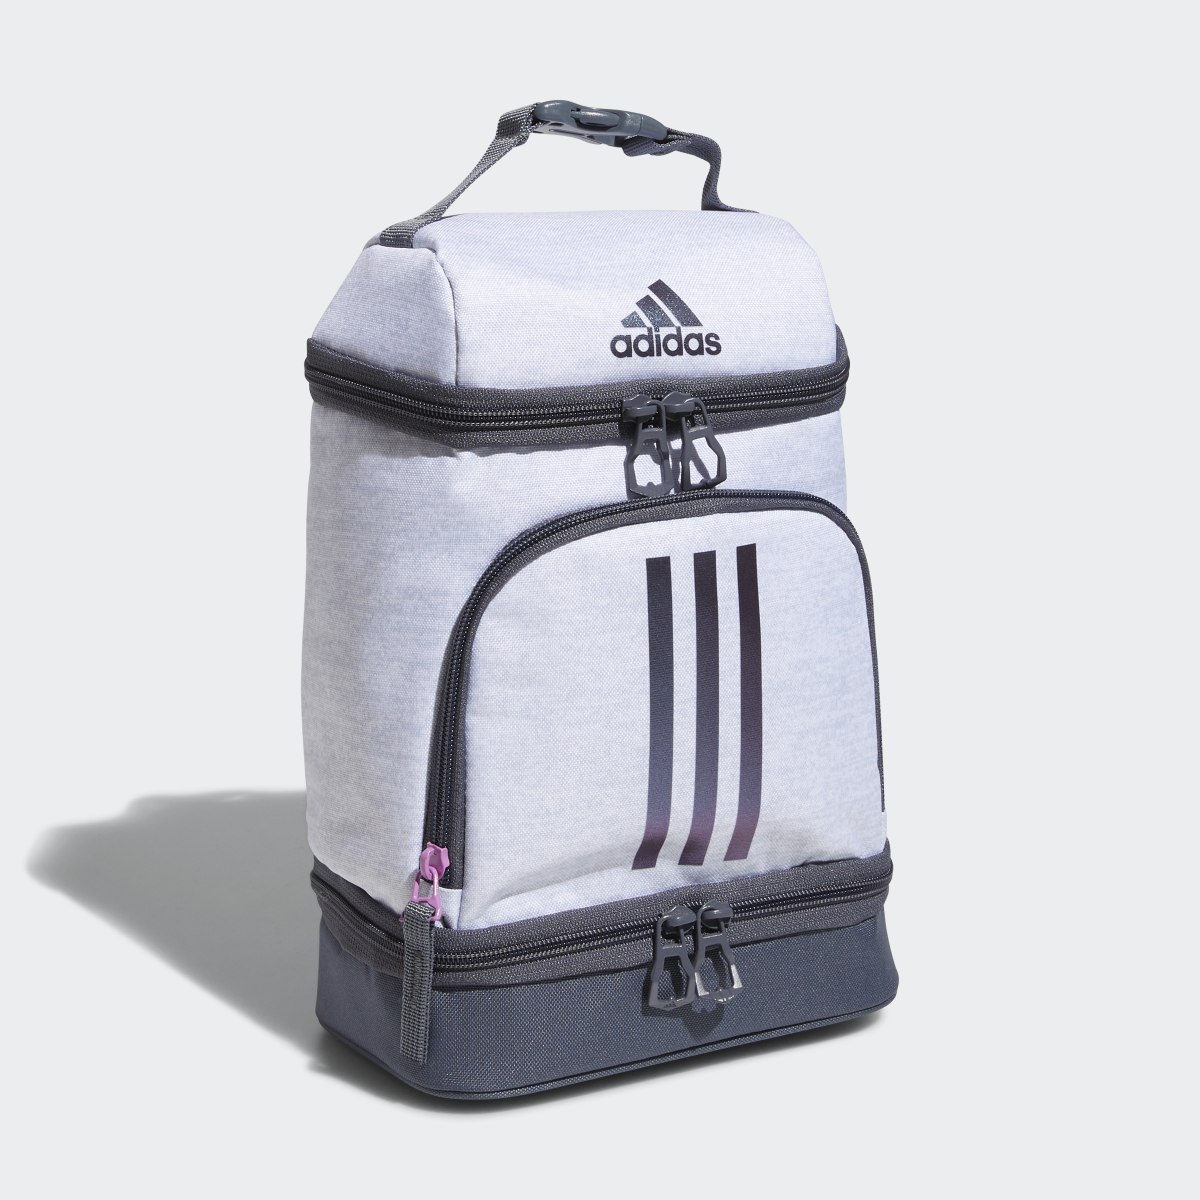 Adidas Excel Lunch Bag. 4